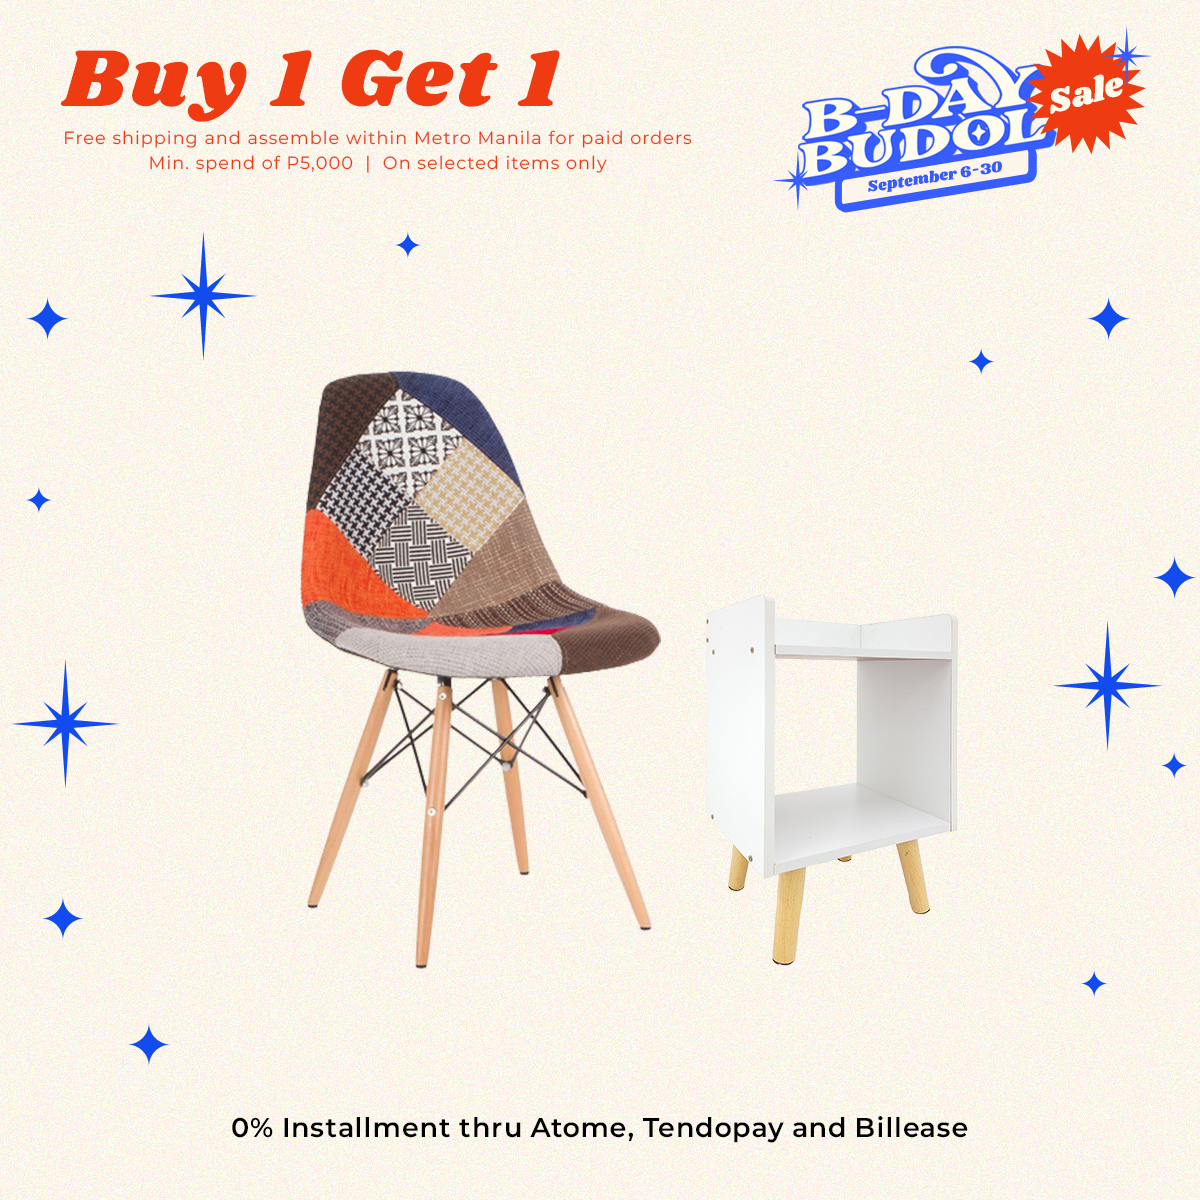 BUY 1 GET FREE: Sabrina Eames Chair + Zairene Bedside Table